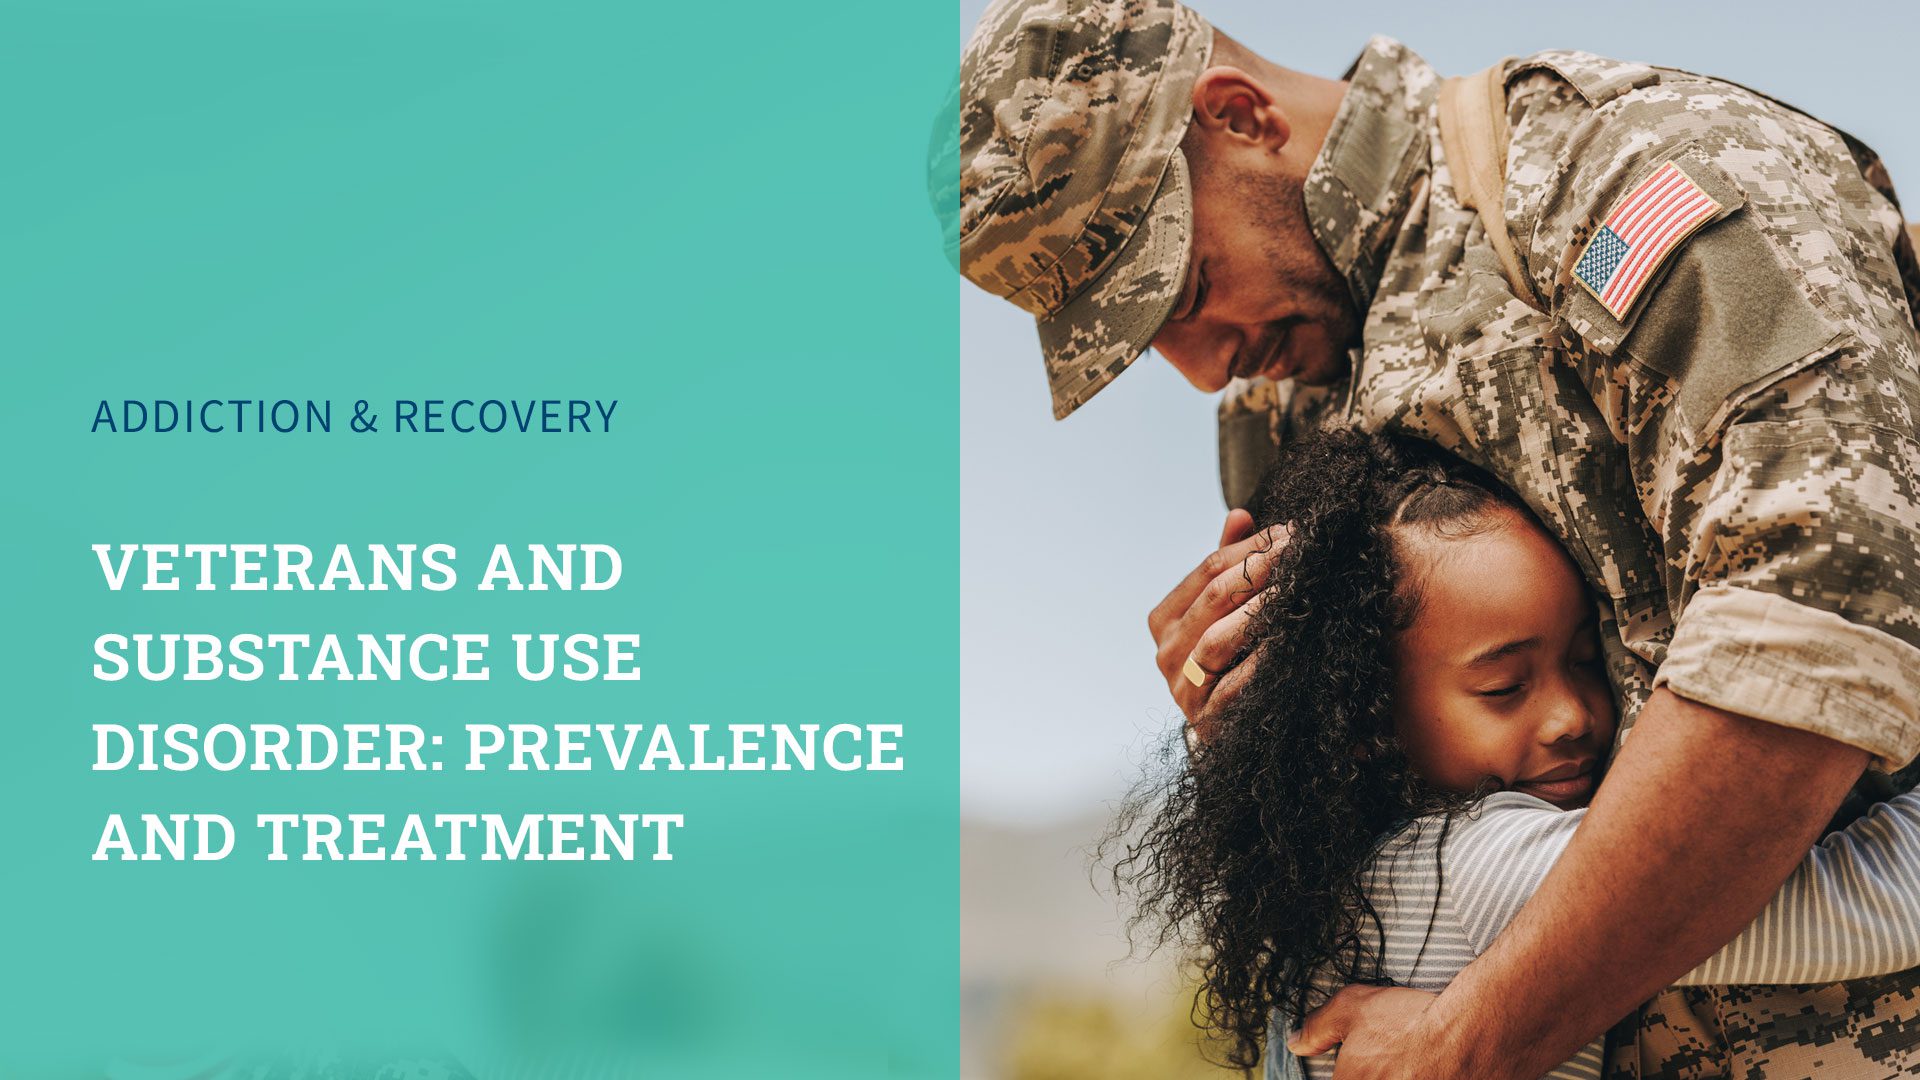 Veterans and Substance Use Disorder: Prevalence and Treatment